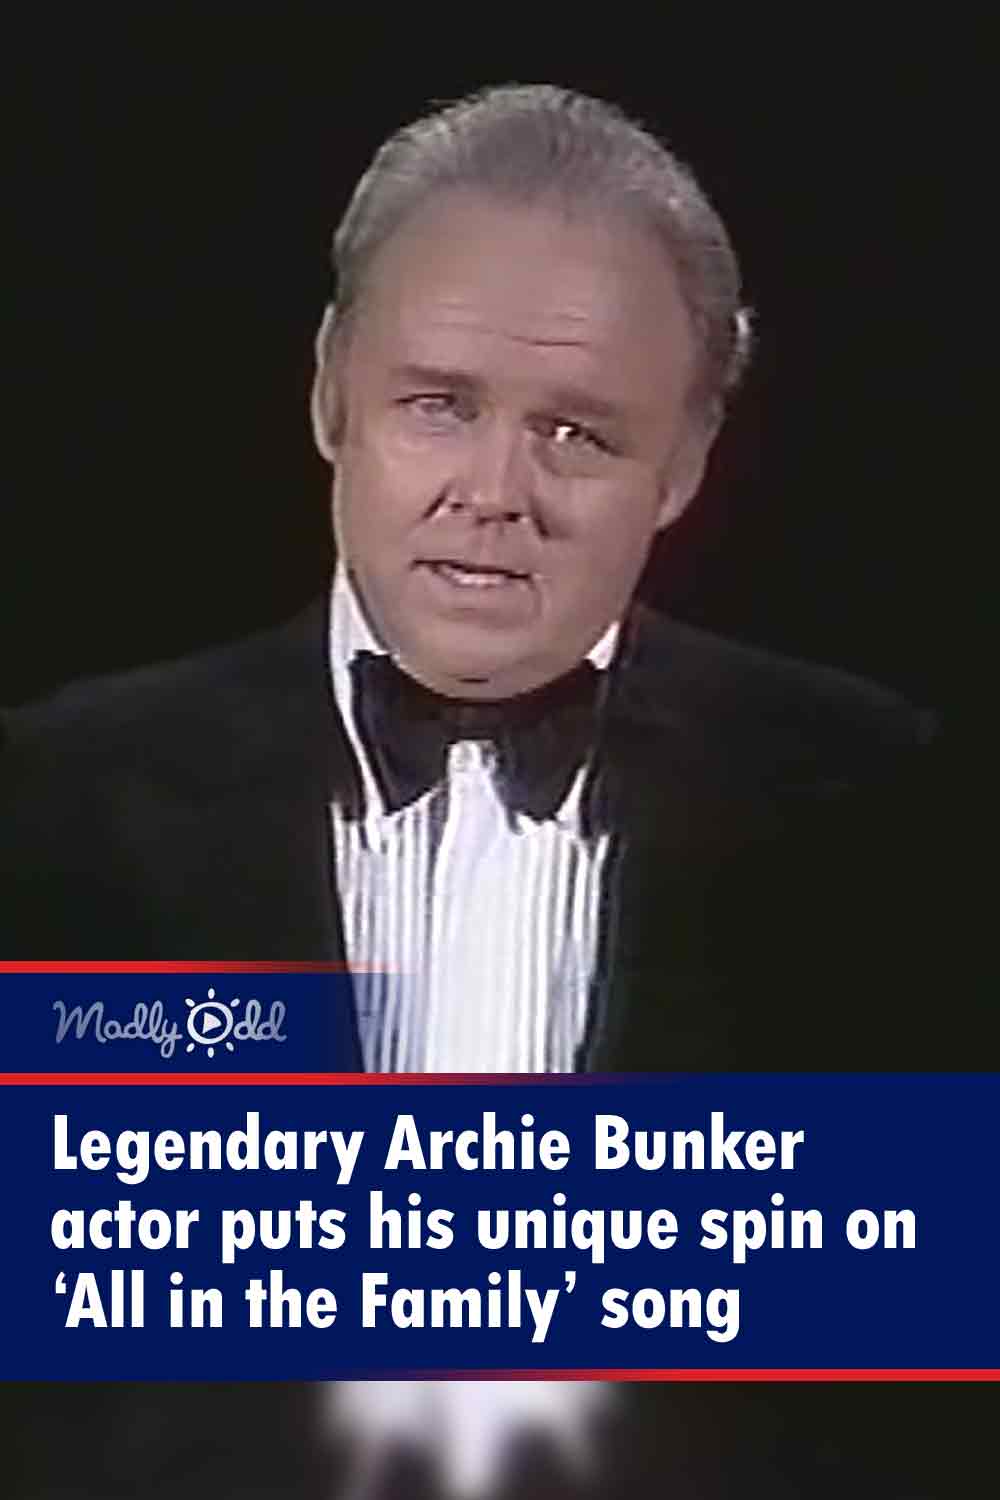 Legendary Archie Bunker actor puts his unique spin on ‘All in the Family’ song